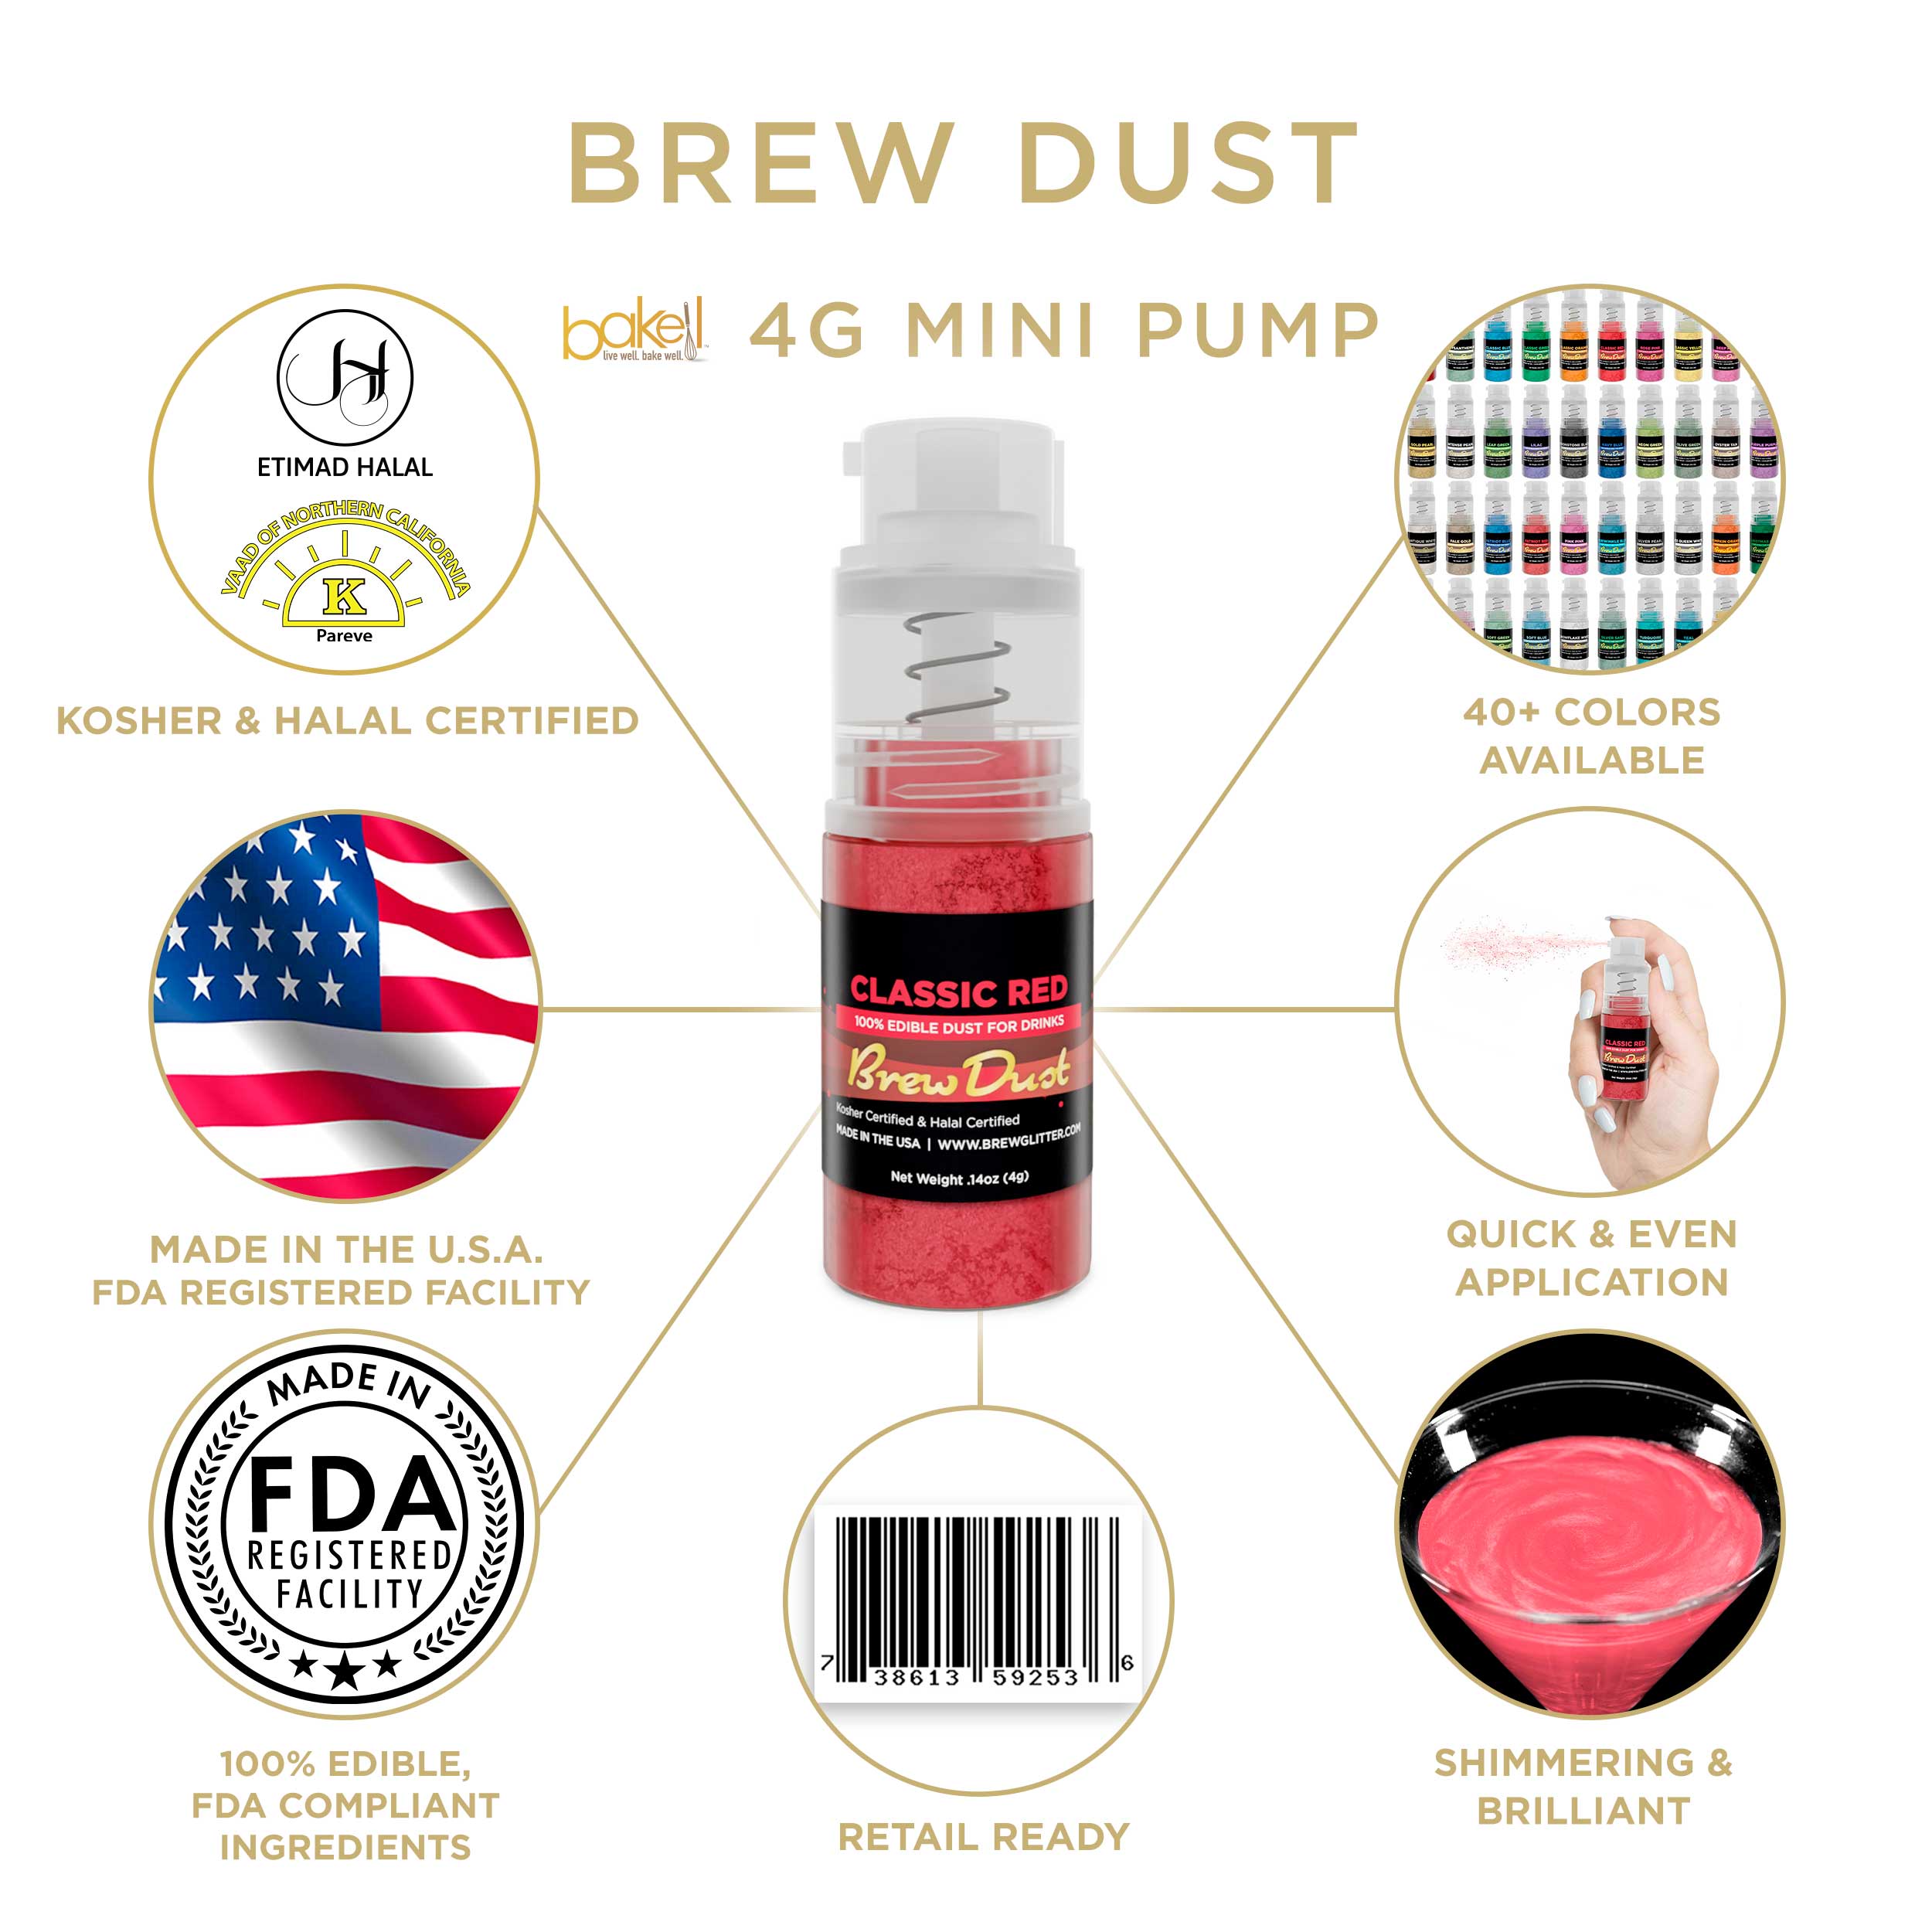 Classic Red Brew Dust Miniature Spray Pump | Infographic and Information